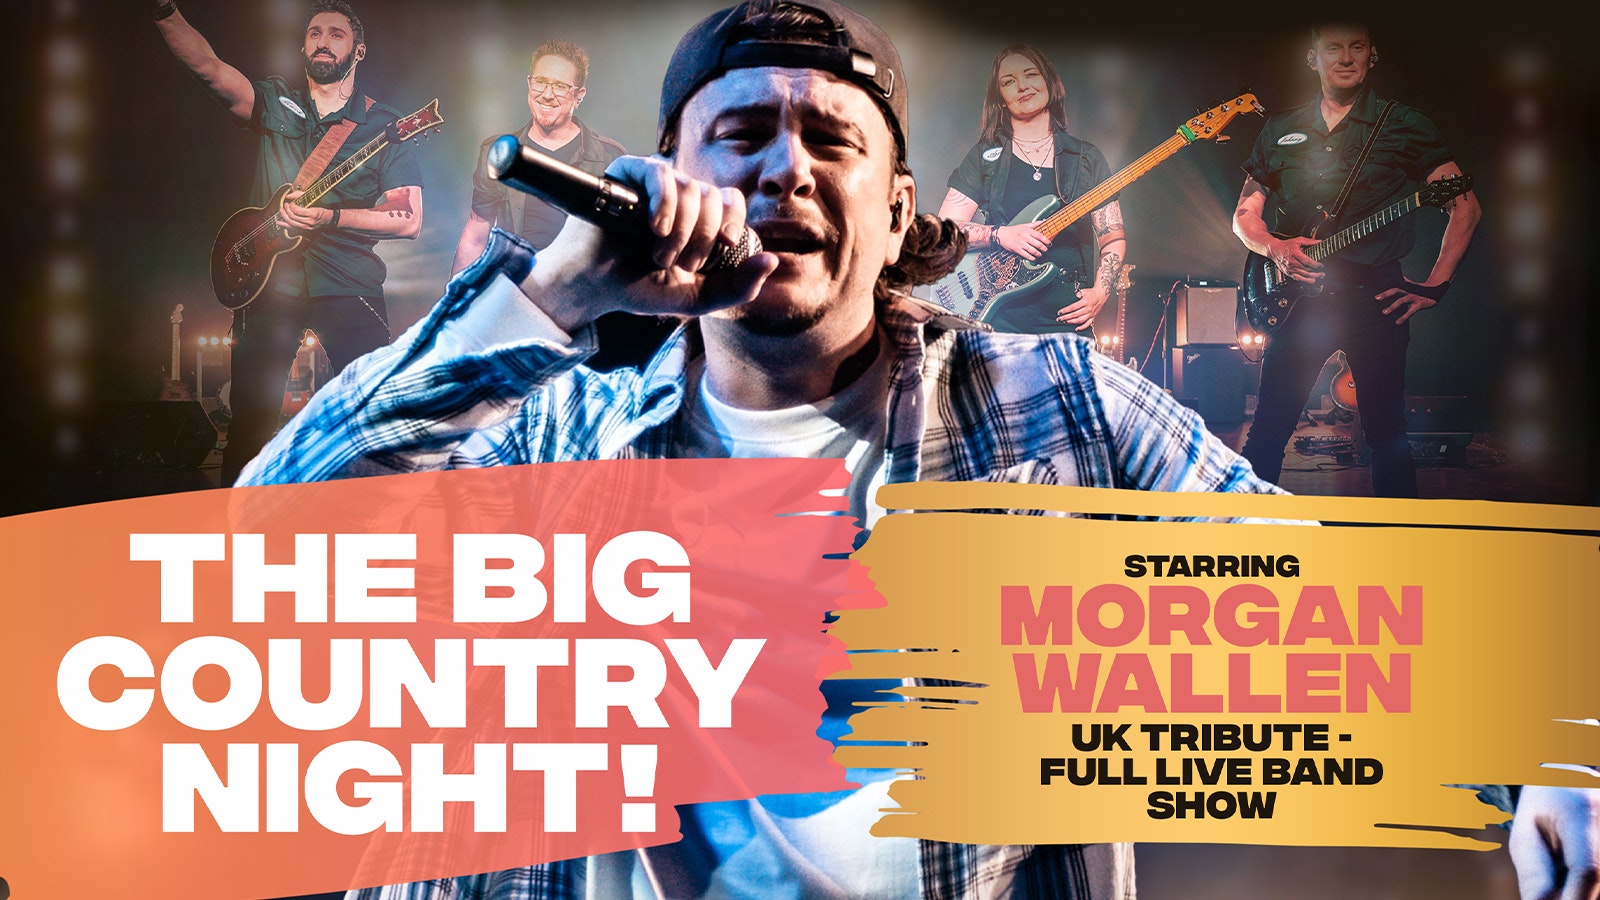 🤠 THE BIG COUNTRY NIGHT! Starring Morgan Wallen UK Tribute + Special Country Guests